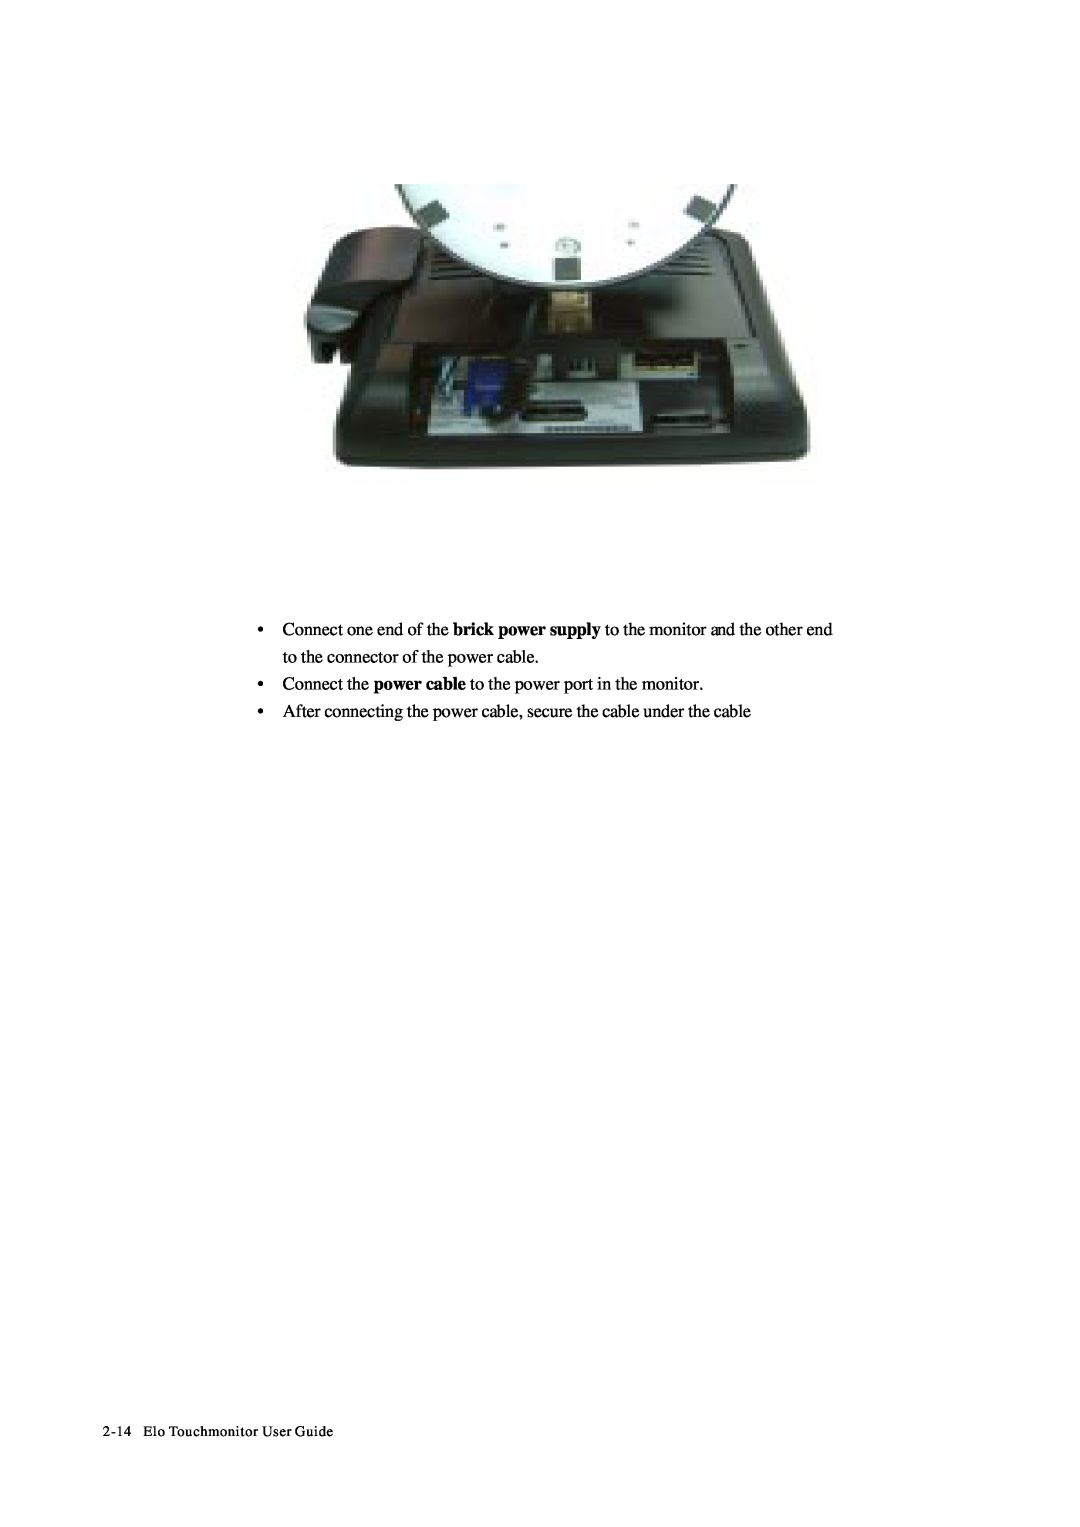 Tyco Electronics 1229L manual Connect the power cable to the power port in the monitor, Elo Touchmonitor User Guide 